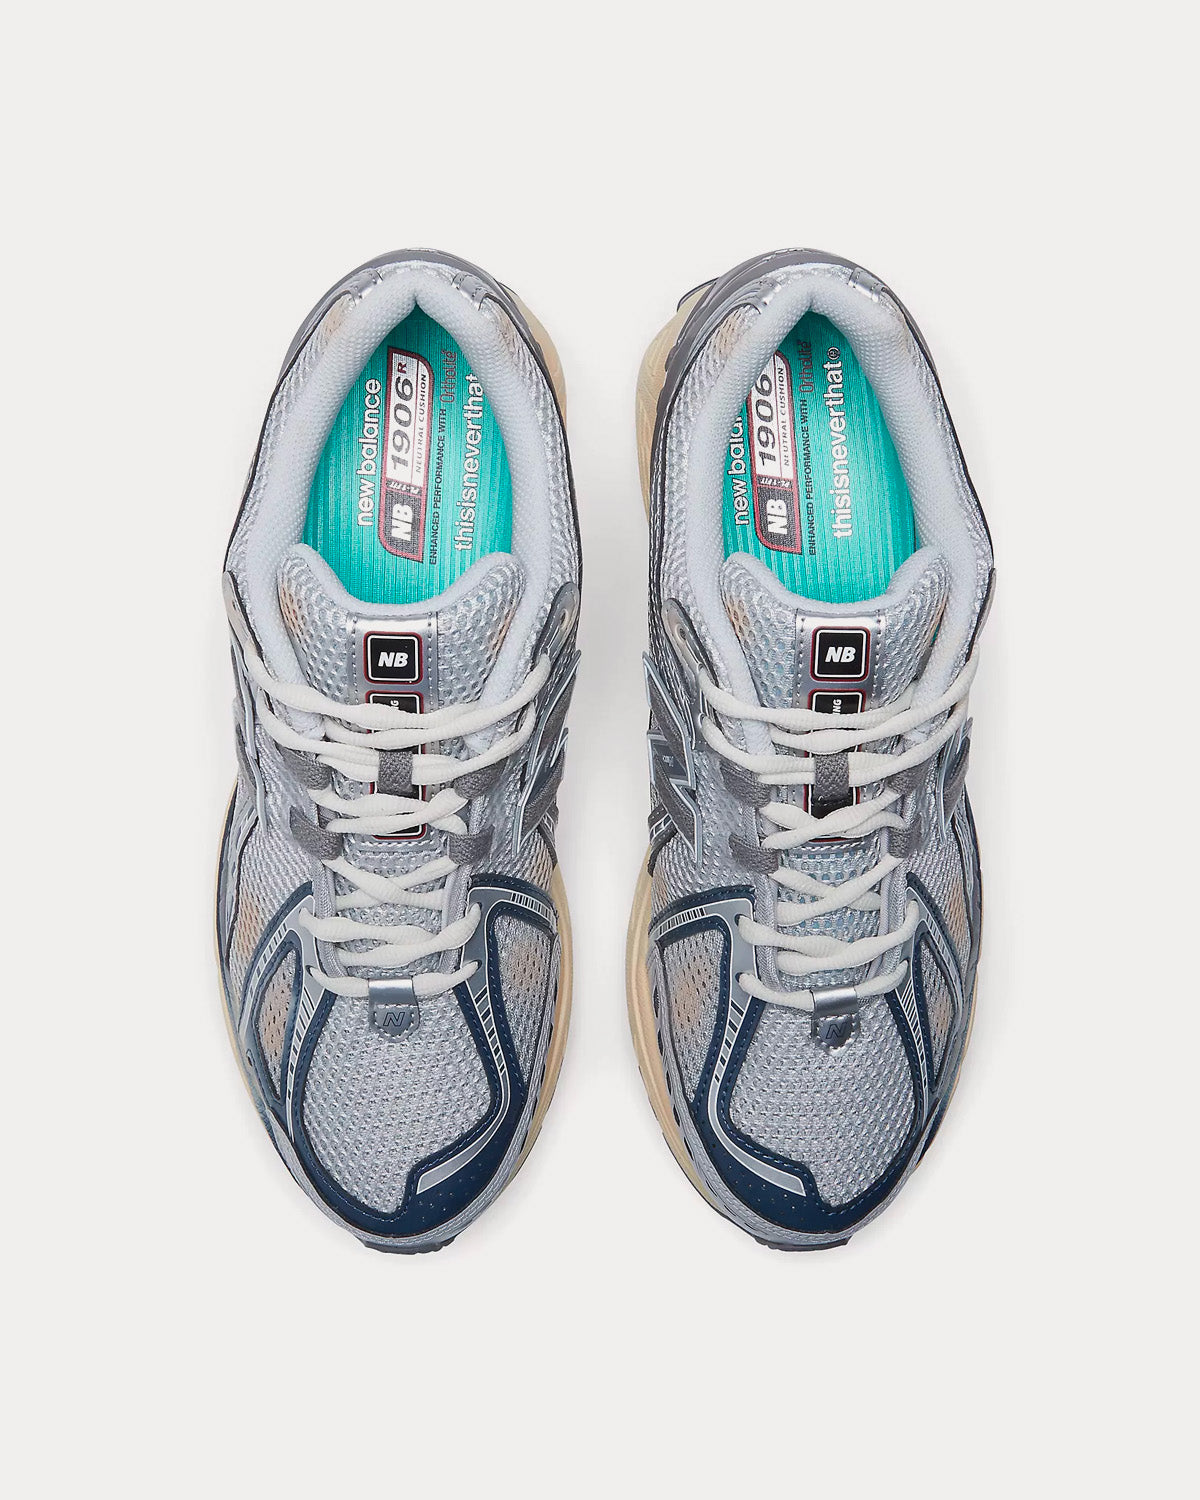 New Balance x thisisneverthat - 1906R Rain Cloud with Metallic Silver and Grey Low Top Sneakers